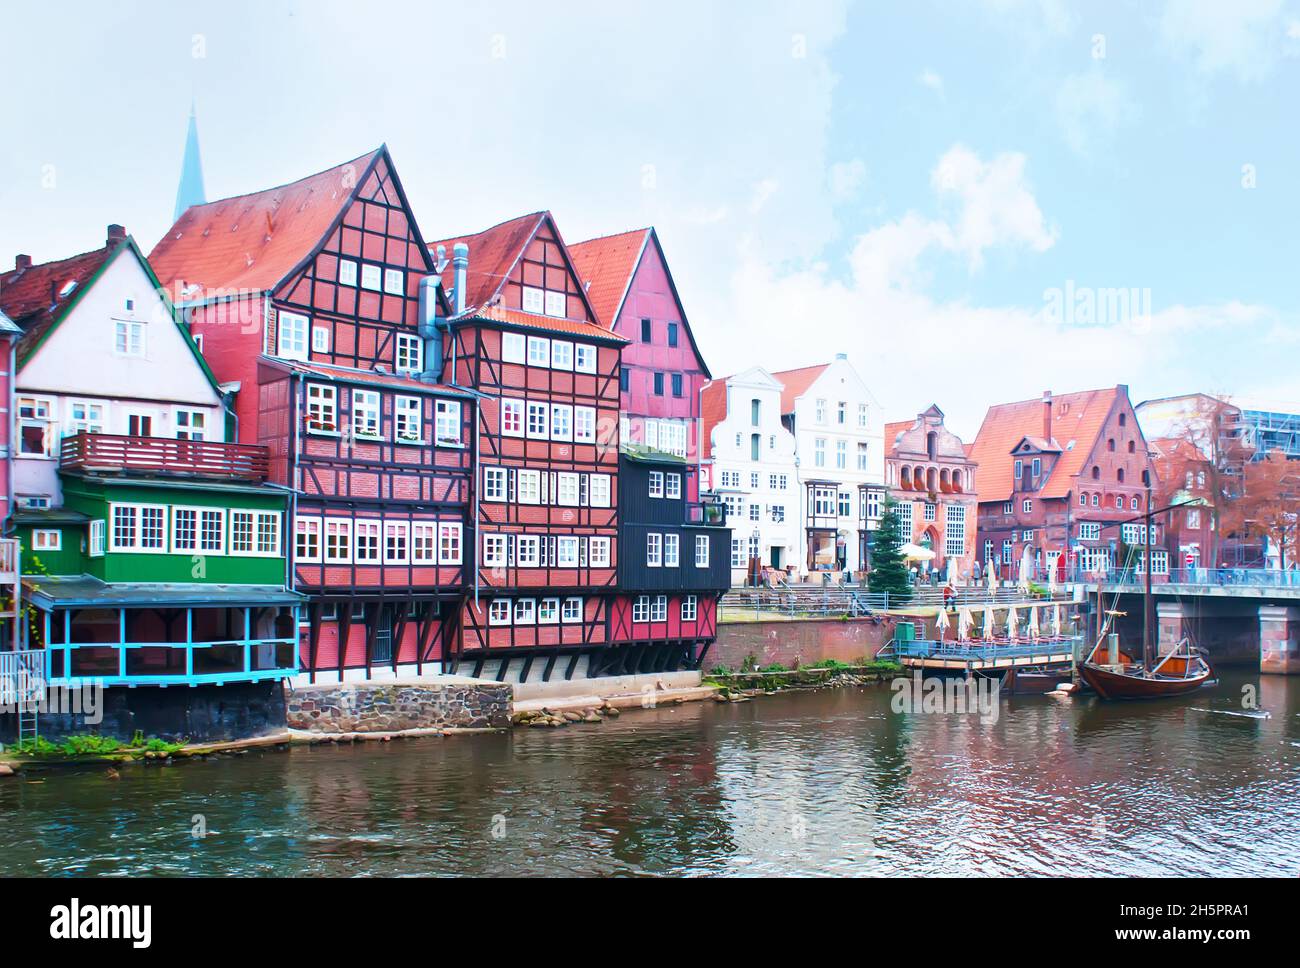 The old harbour on Ilmenau river in surrounding of half-timbered houses, Luneburg, Germany Stock Photo